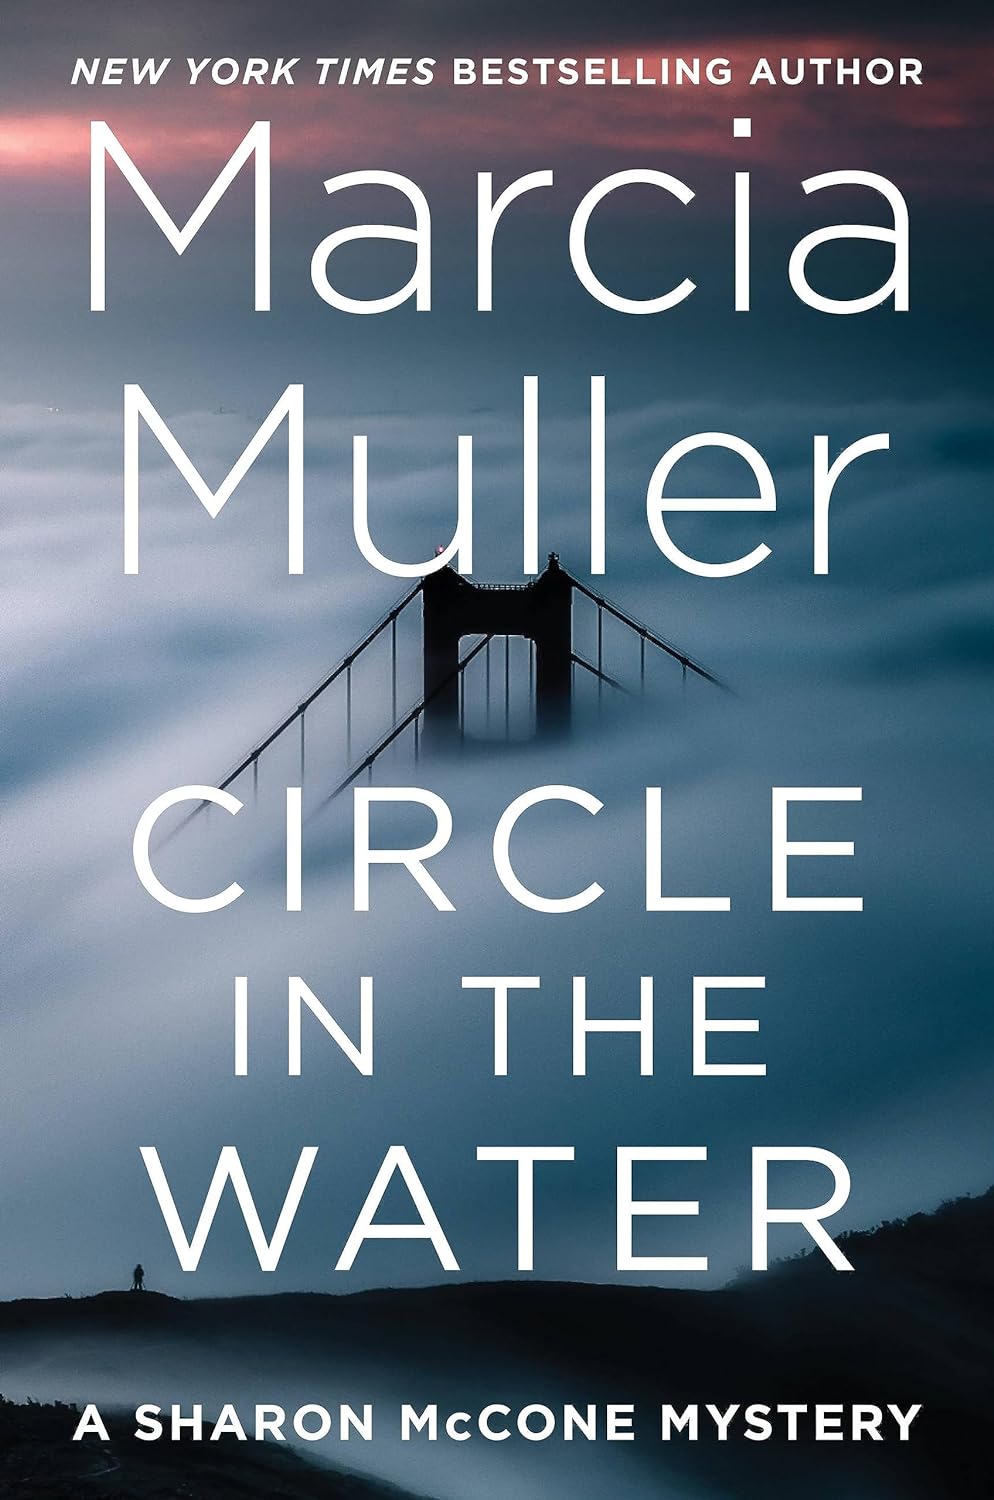 Image for "Circle in the Water"